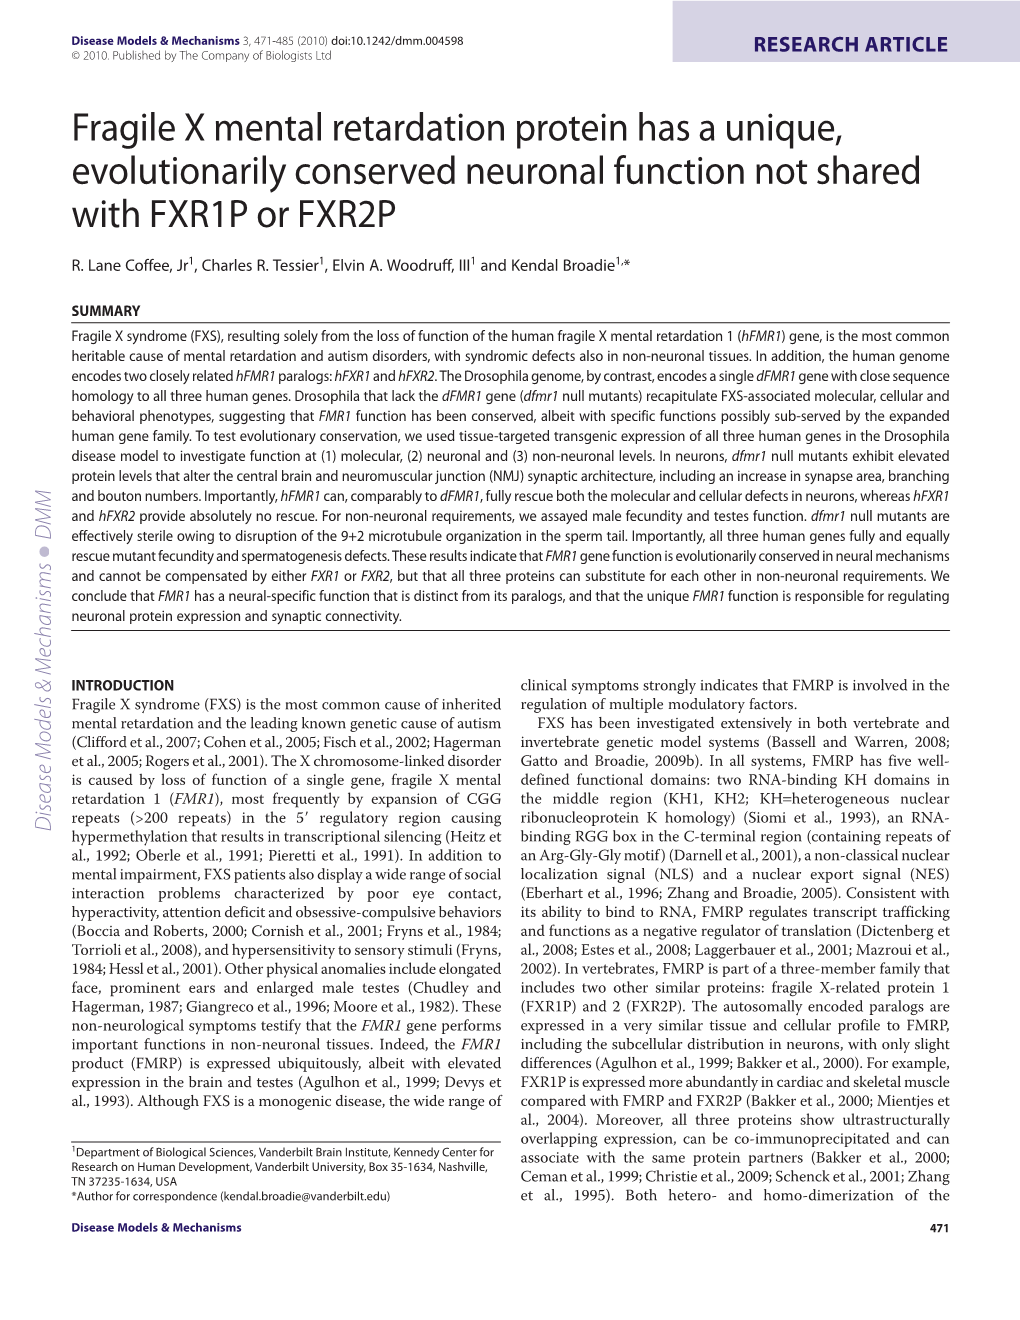 Fragile X Mental Retardation Protein Has a Unique, Evolutionarily Conserved Neuronal Function Not Shared with FXR1P Or FXR2P